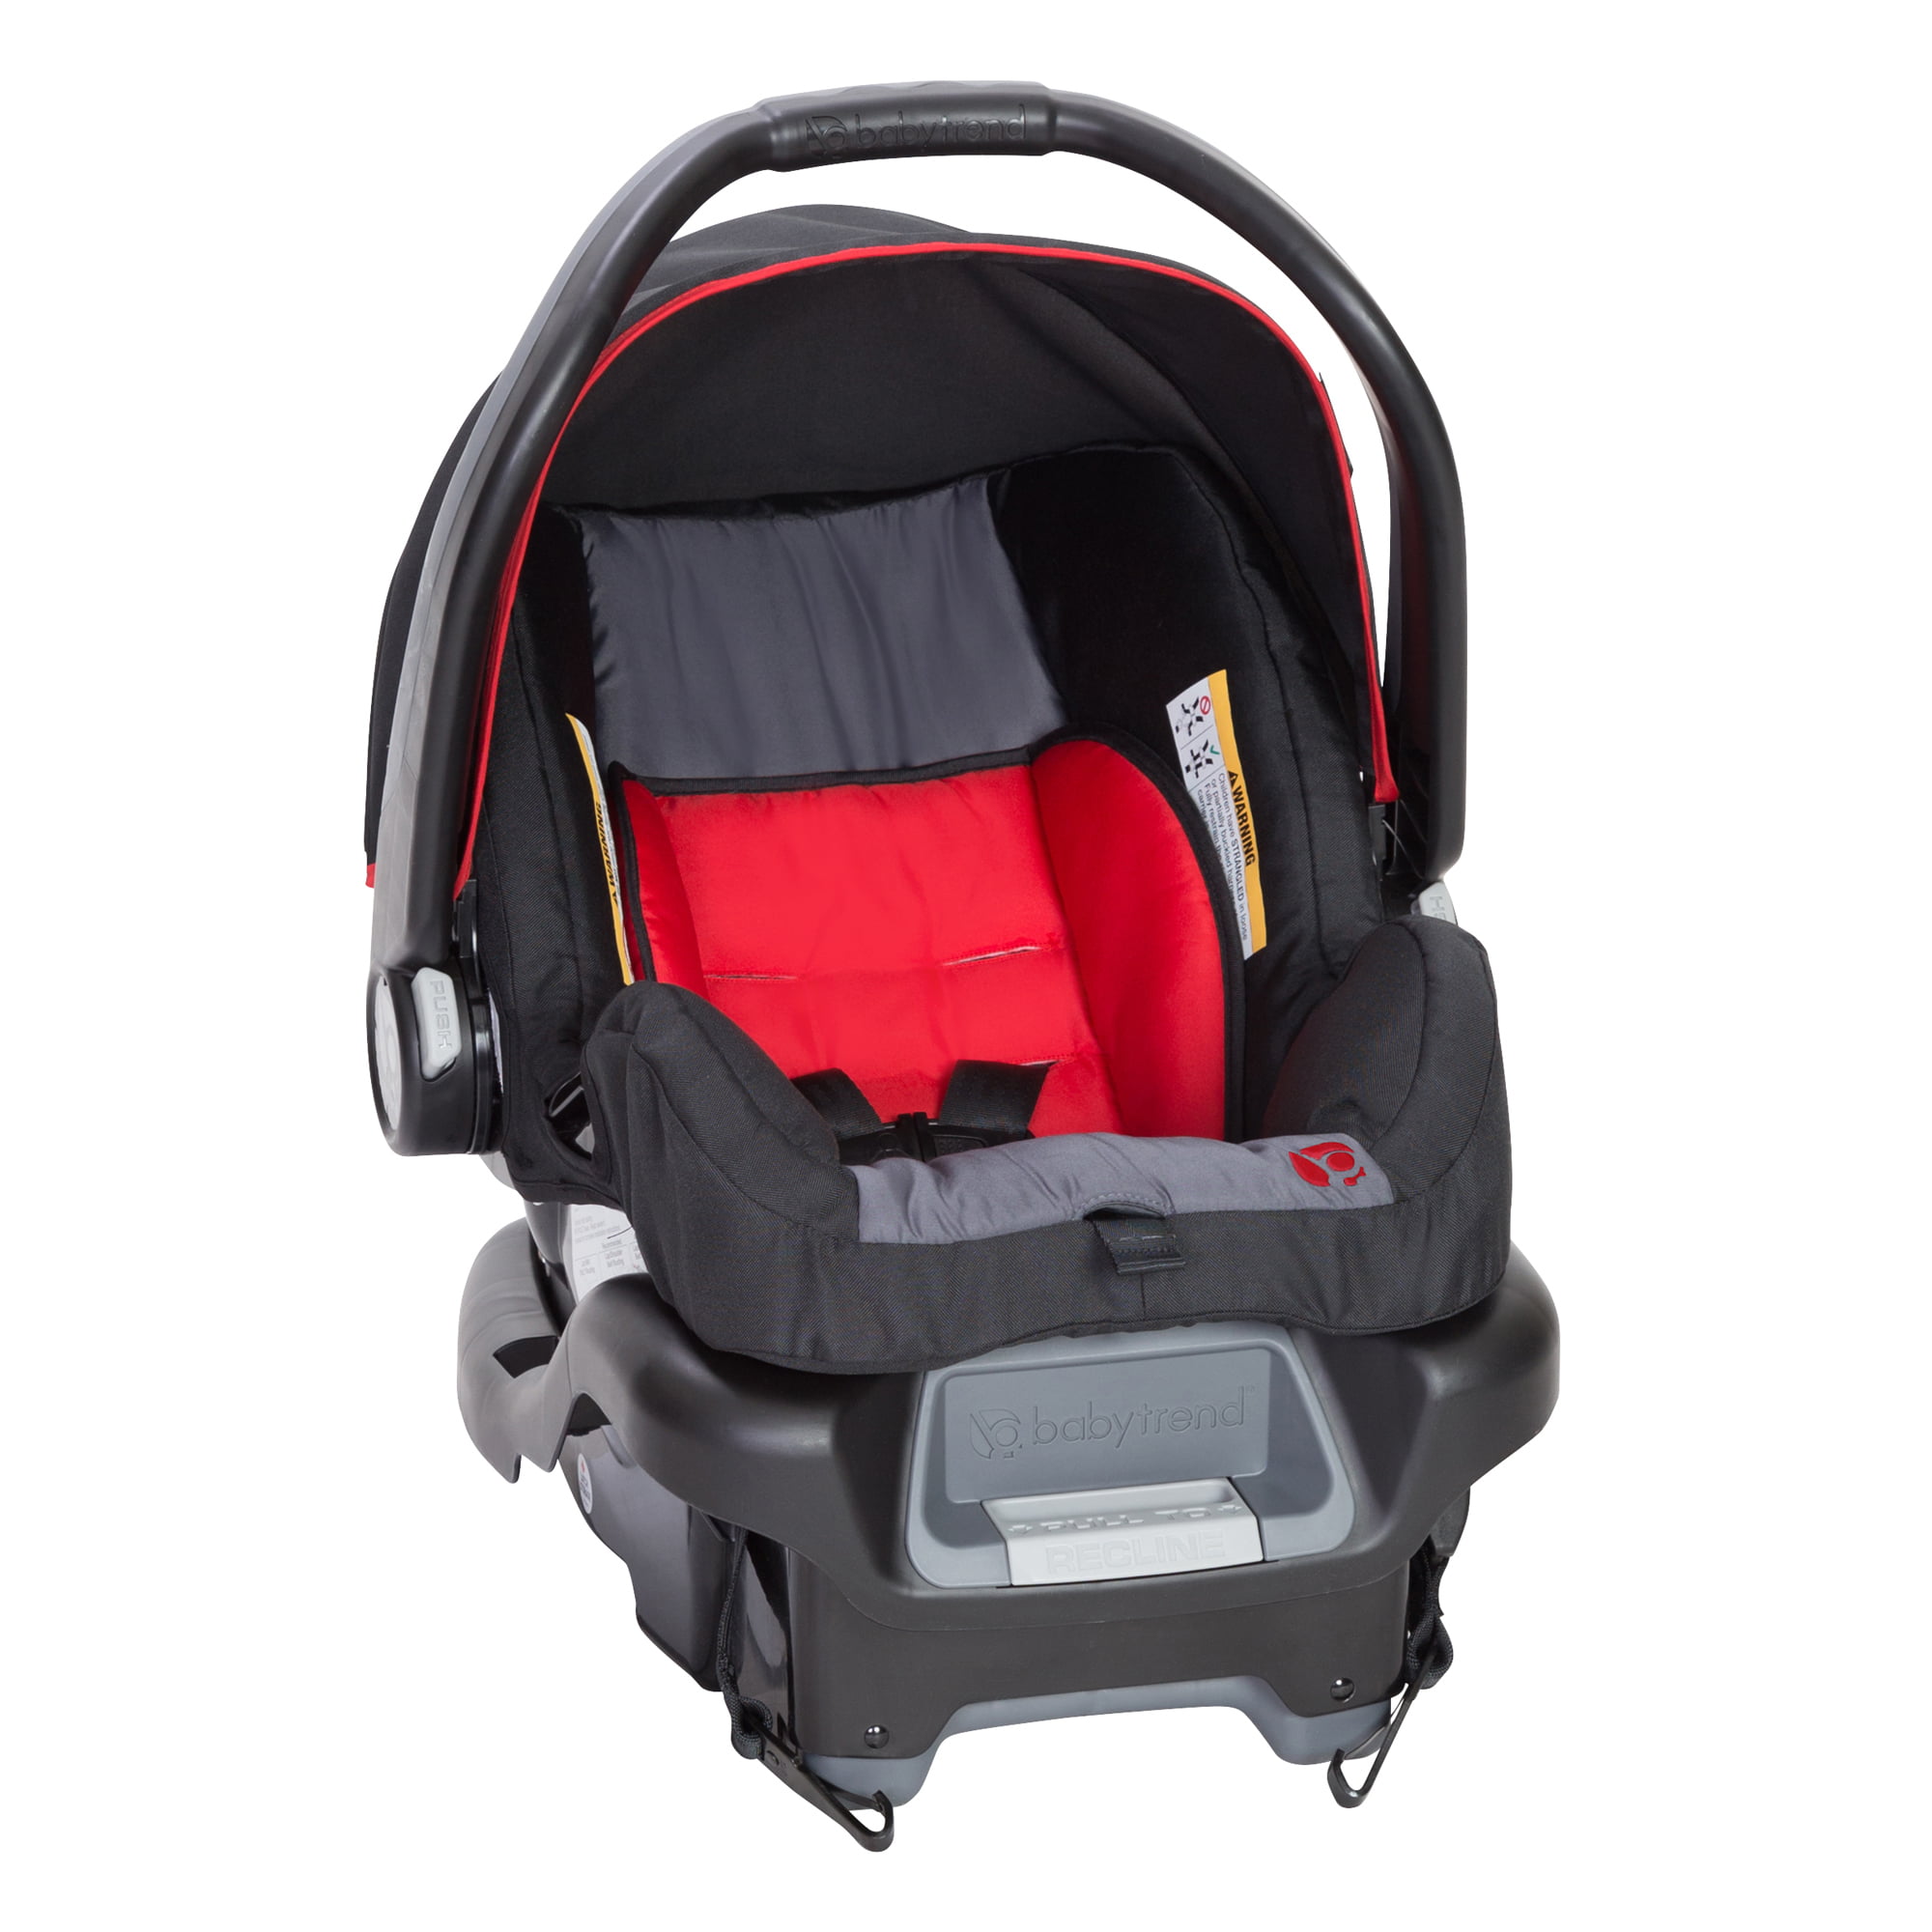 CS79B72A Optic Pink + Baby Trend Ally Infant Car Seat Base Baby Trend Ally 35 Infant Car Seat Black 